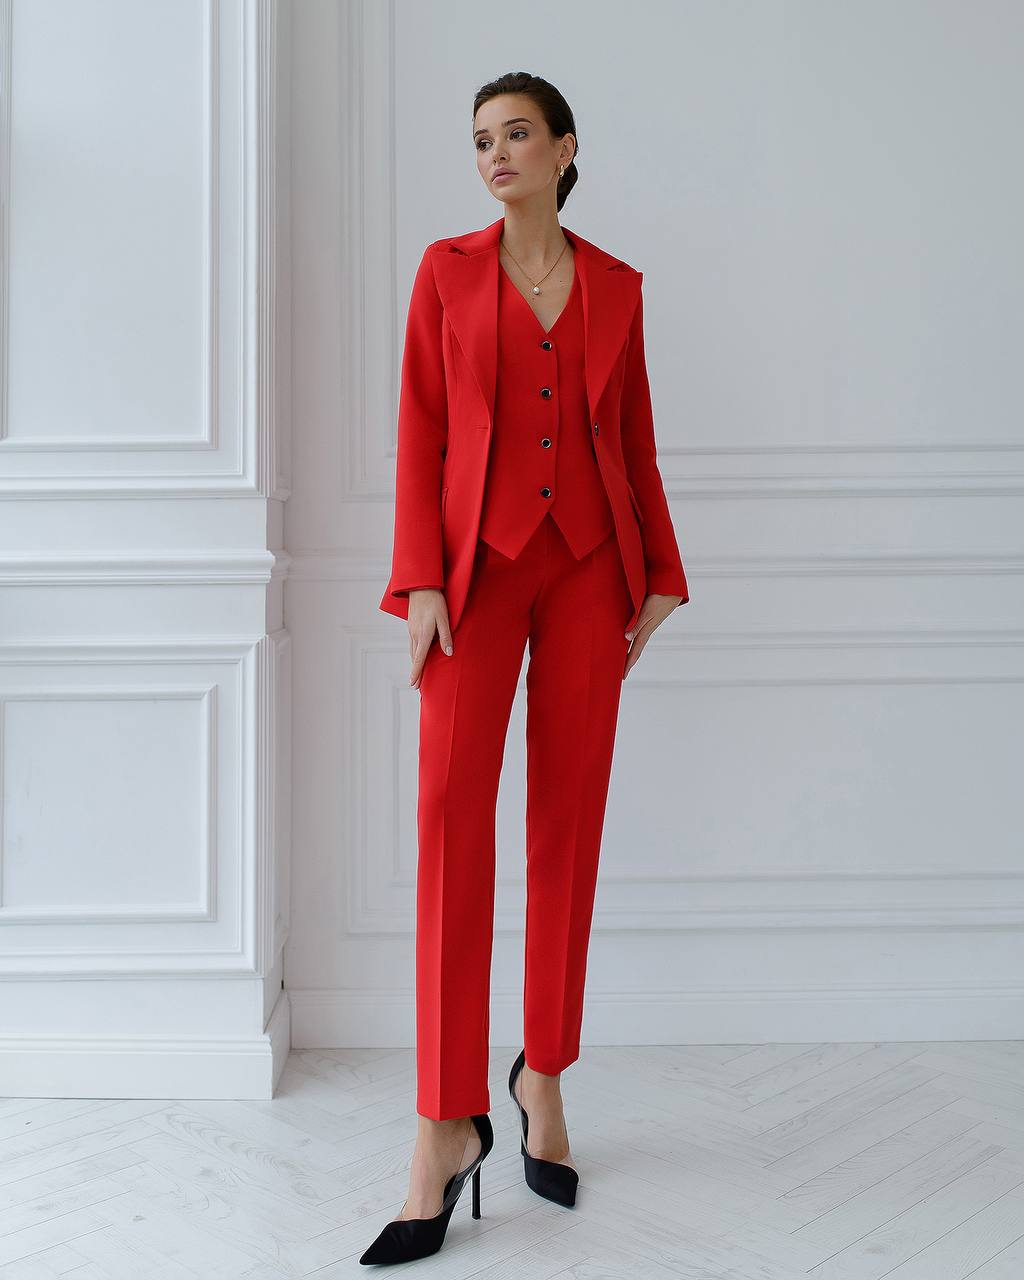 a woman wearing a red suit and black shoes